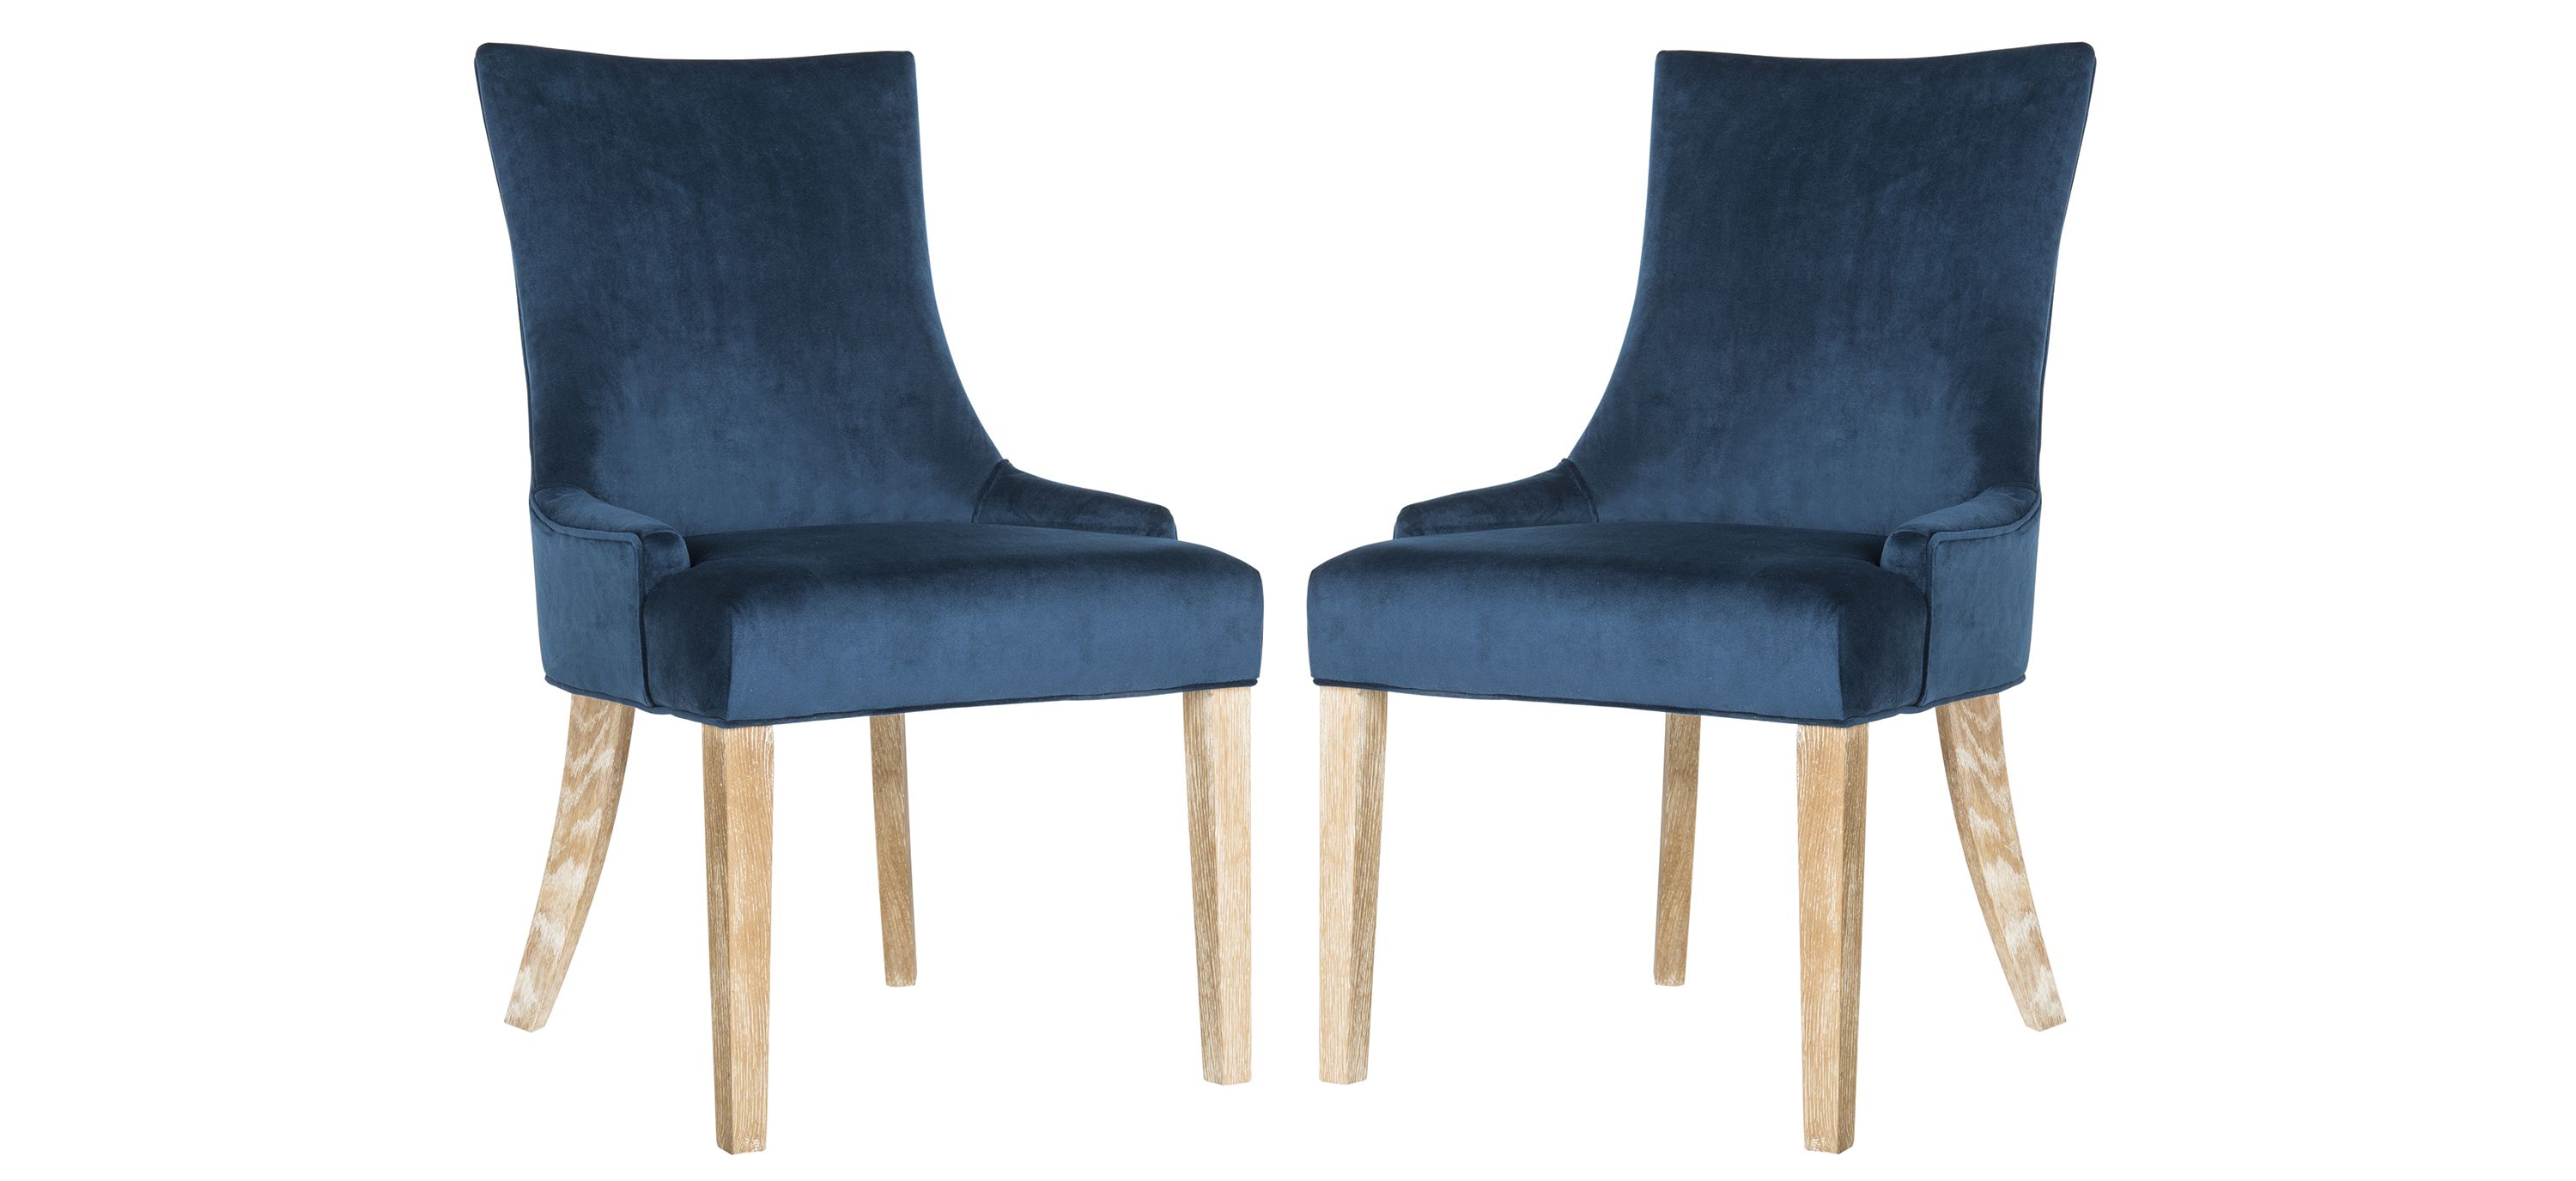 Lester Dining Chair - Set of 2